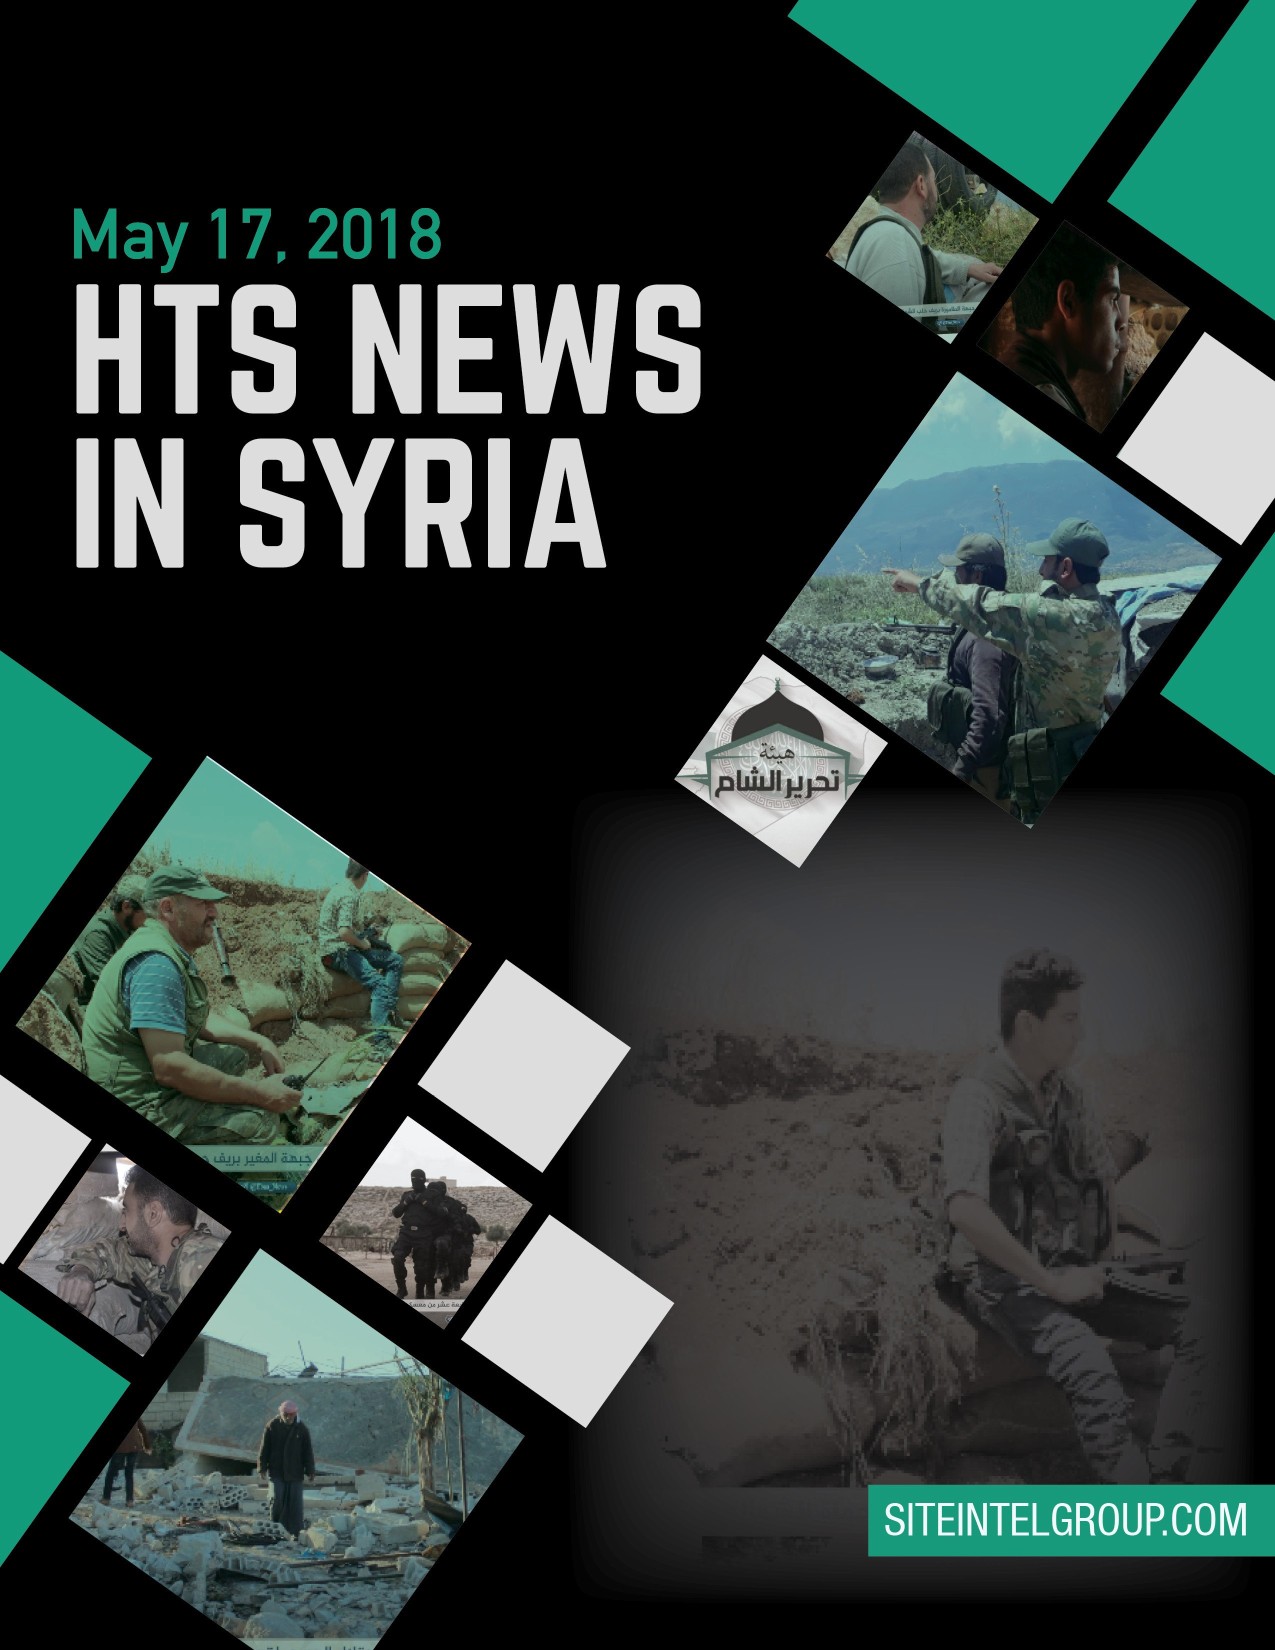 HTS News in Syria for May 17, 2018